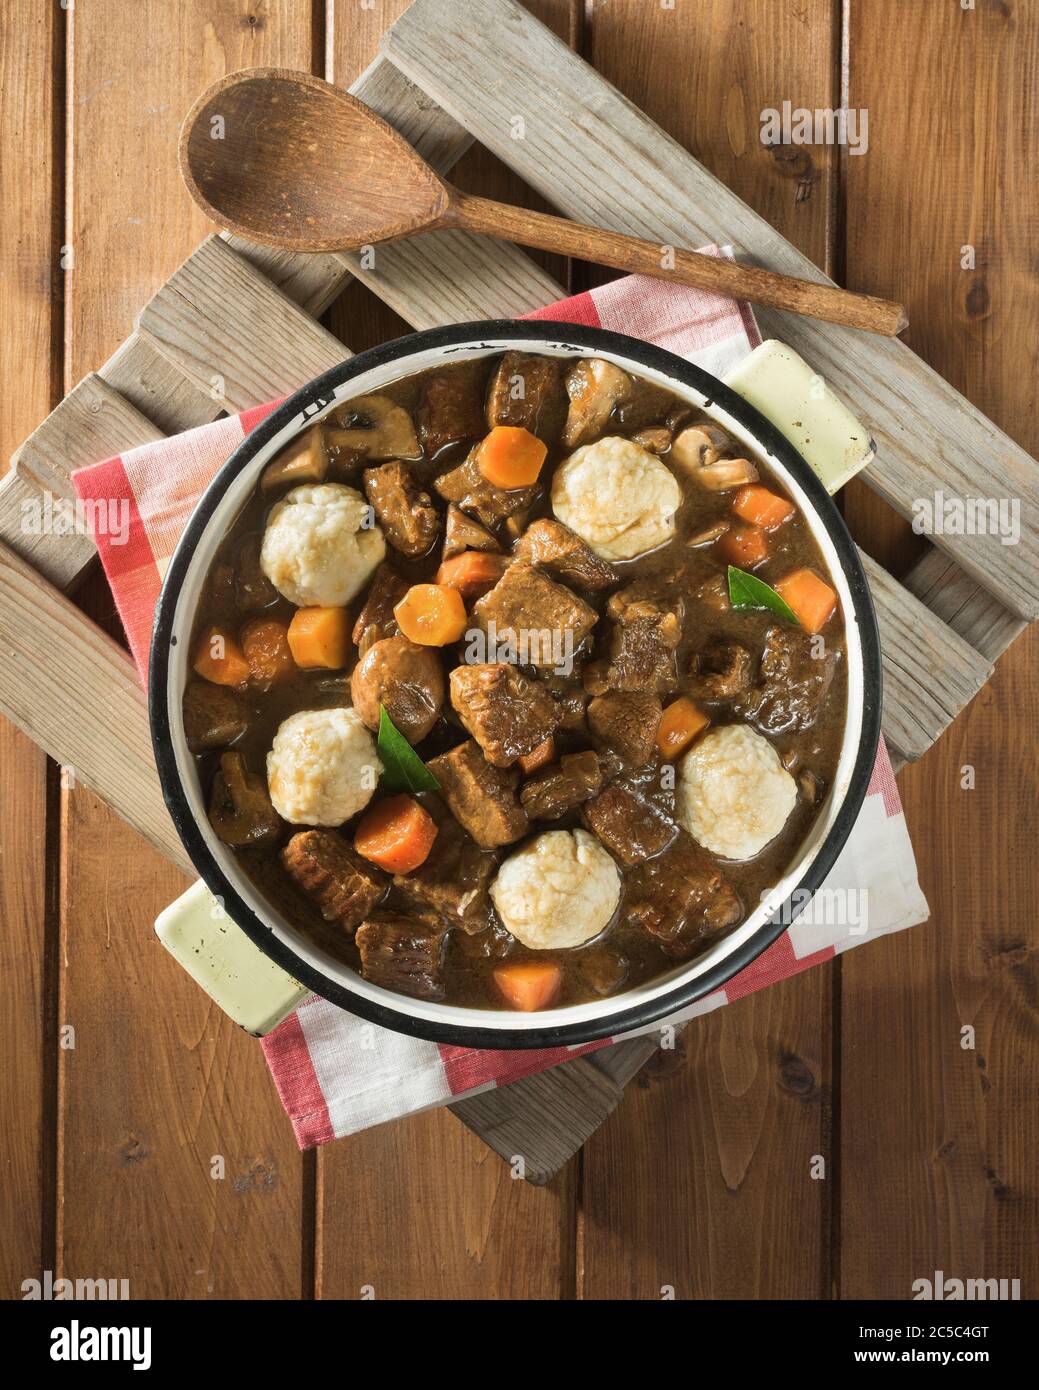 Beef and ale stew with dumplings. UK Food Stock Photo